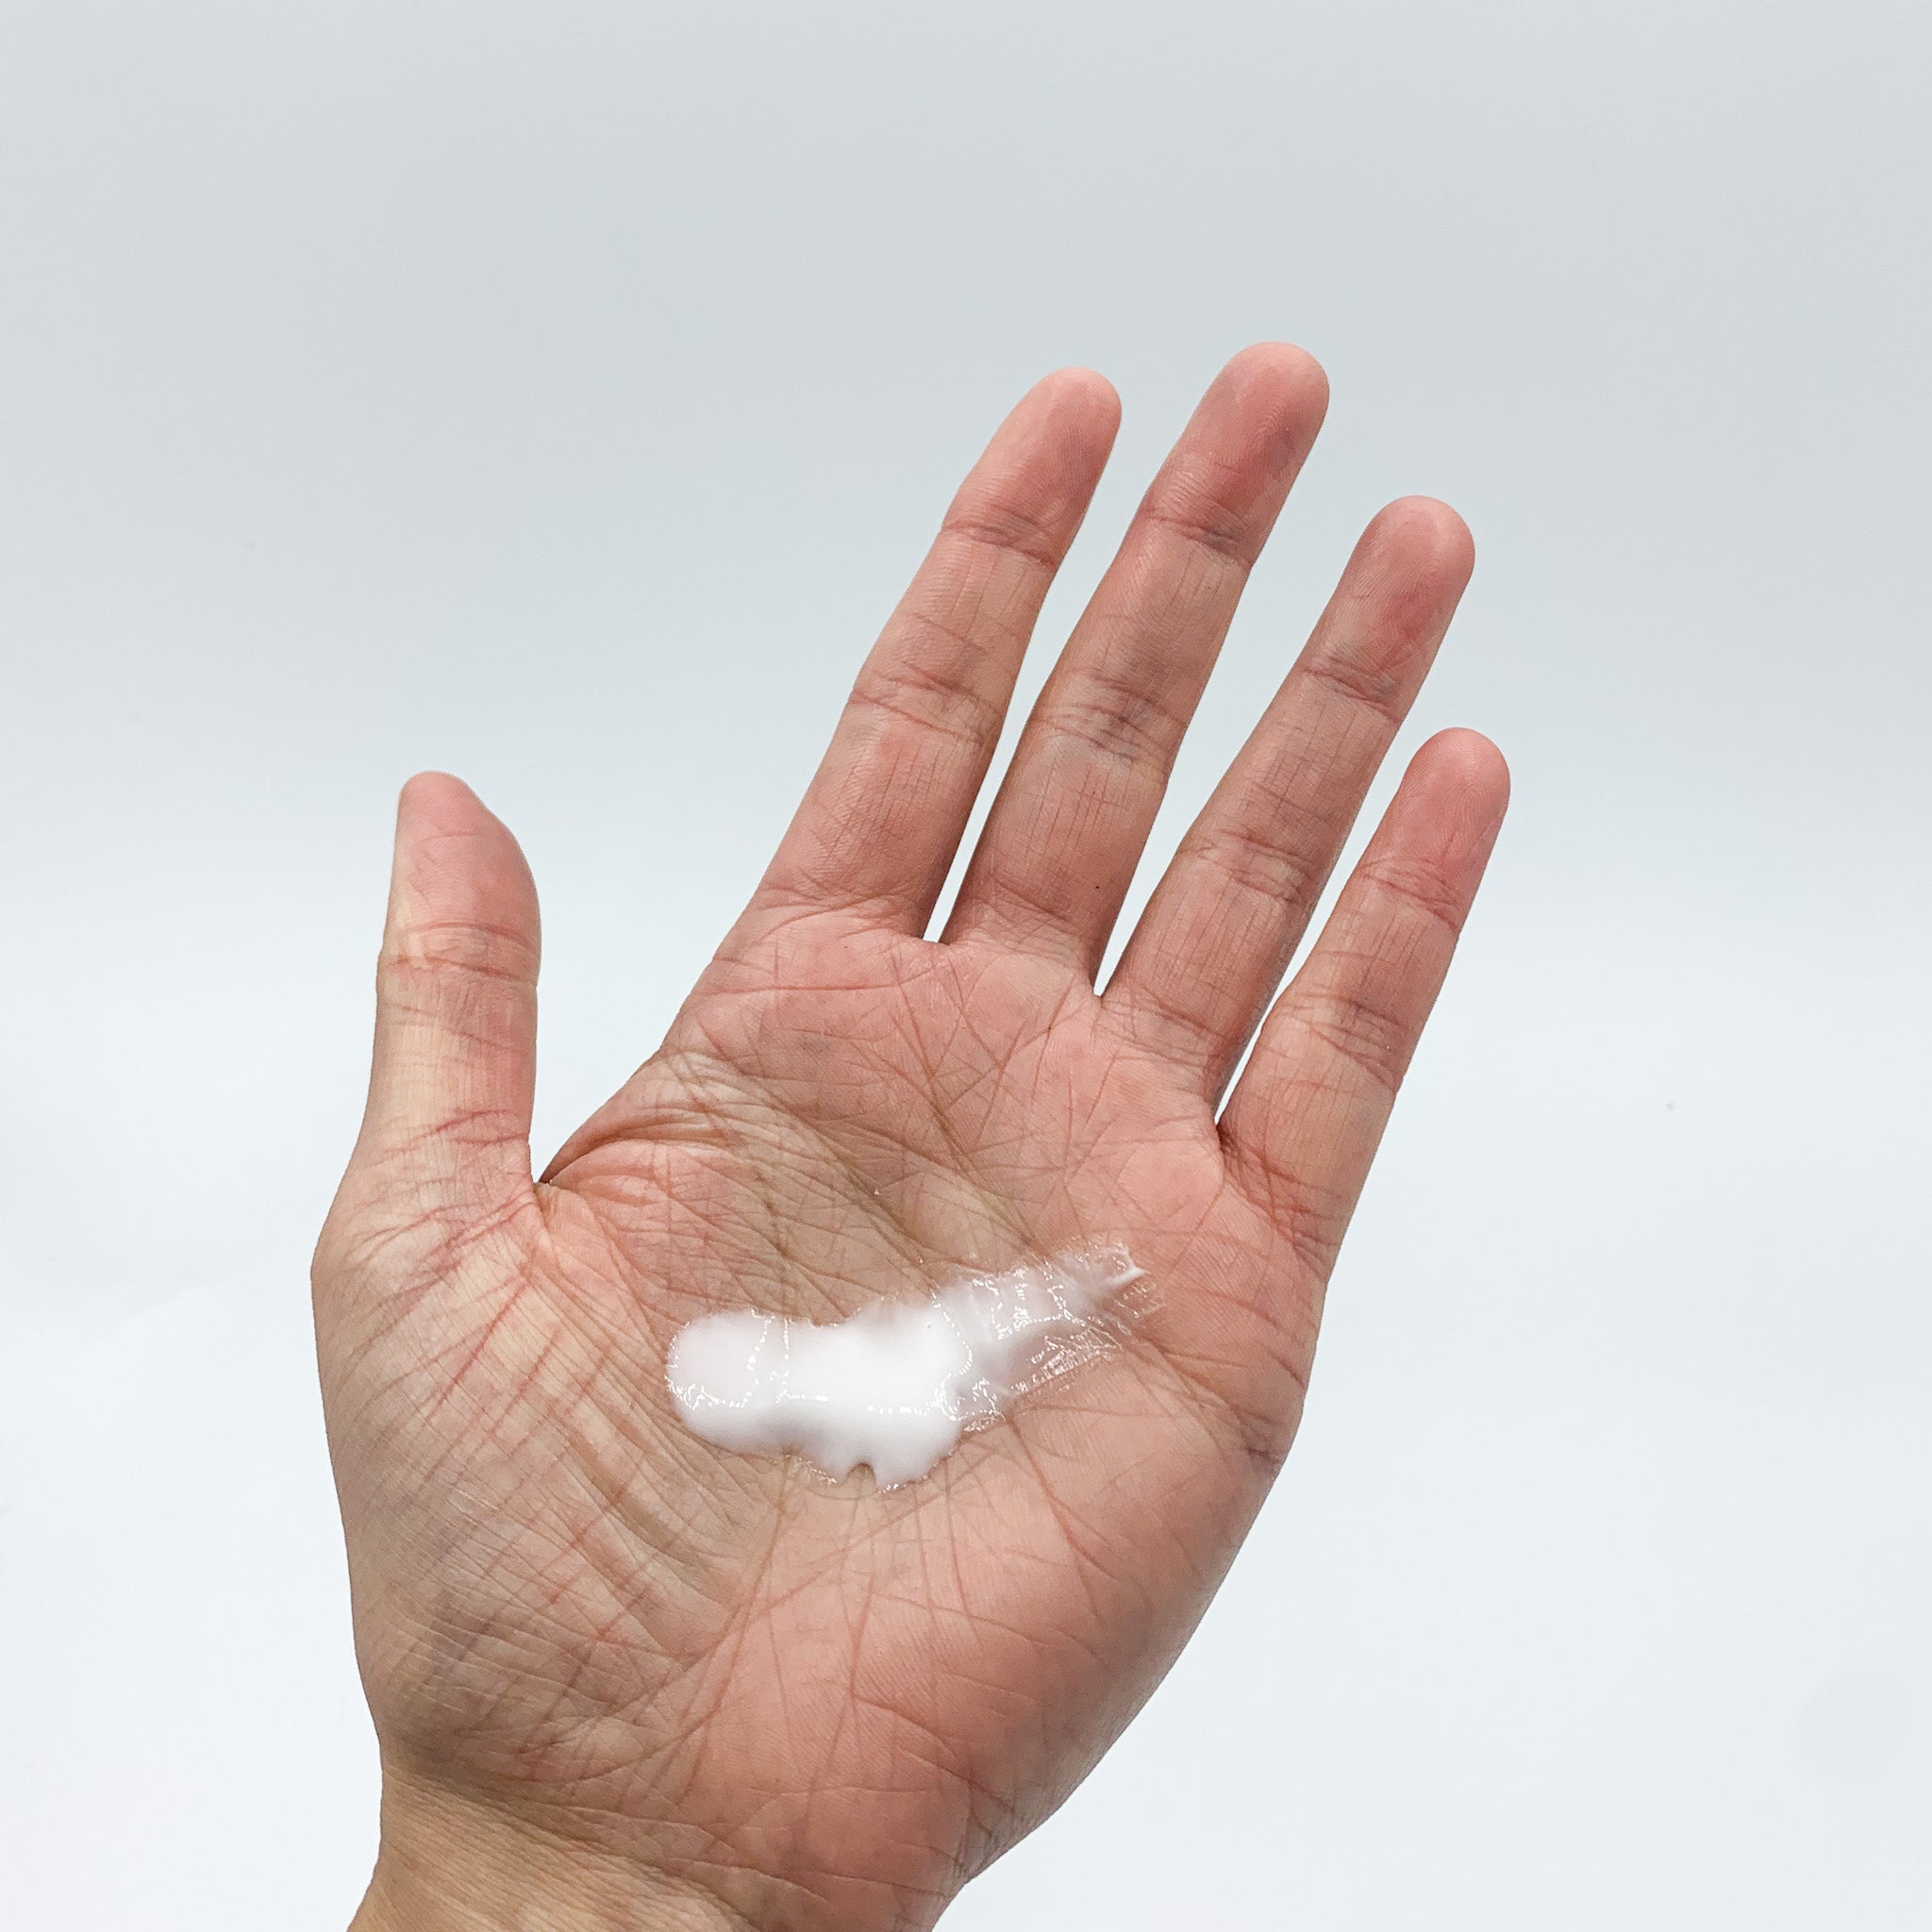 Lightweight and fast absorbing ho wood, grapefruit, and lavender lotion smeared on hands